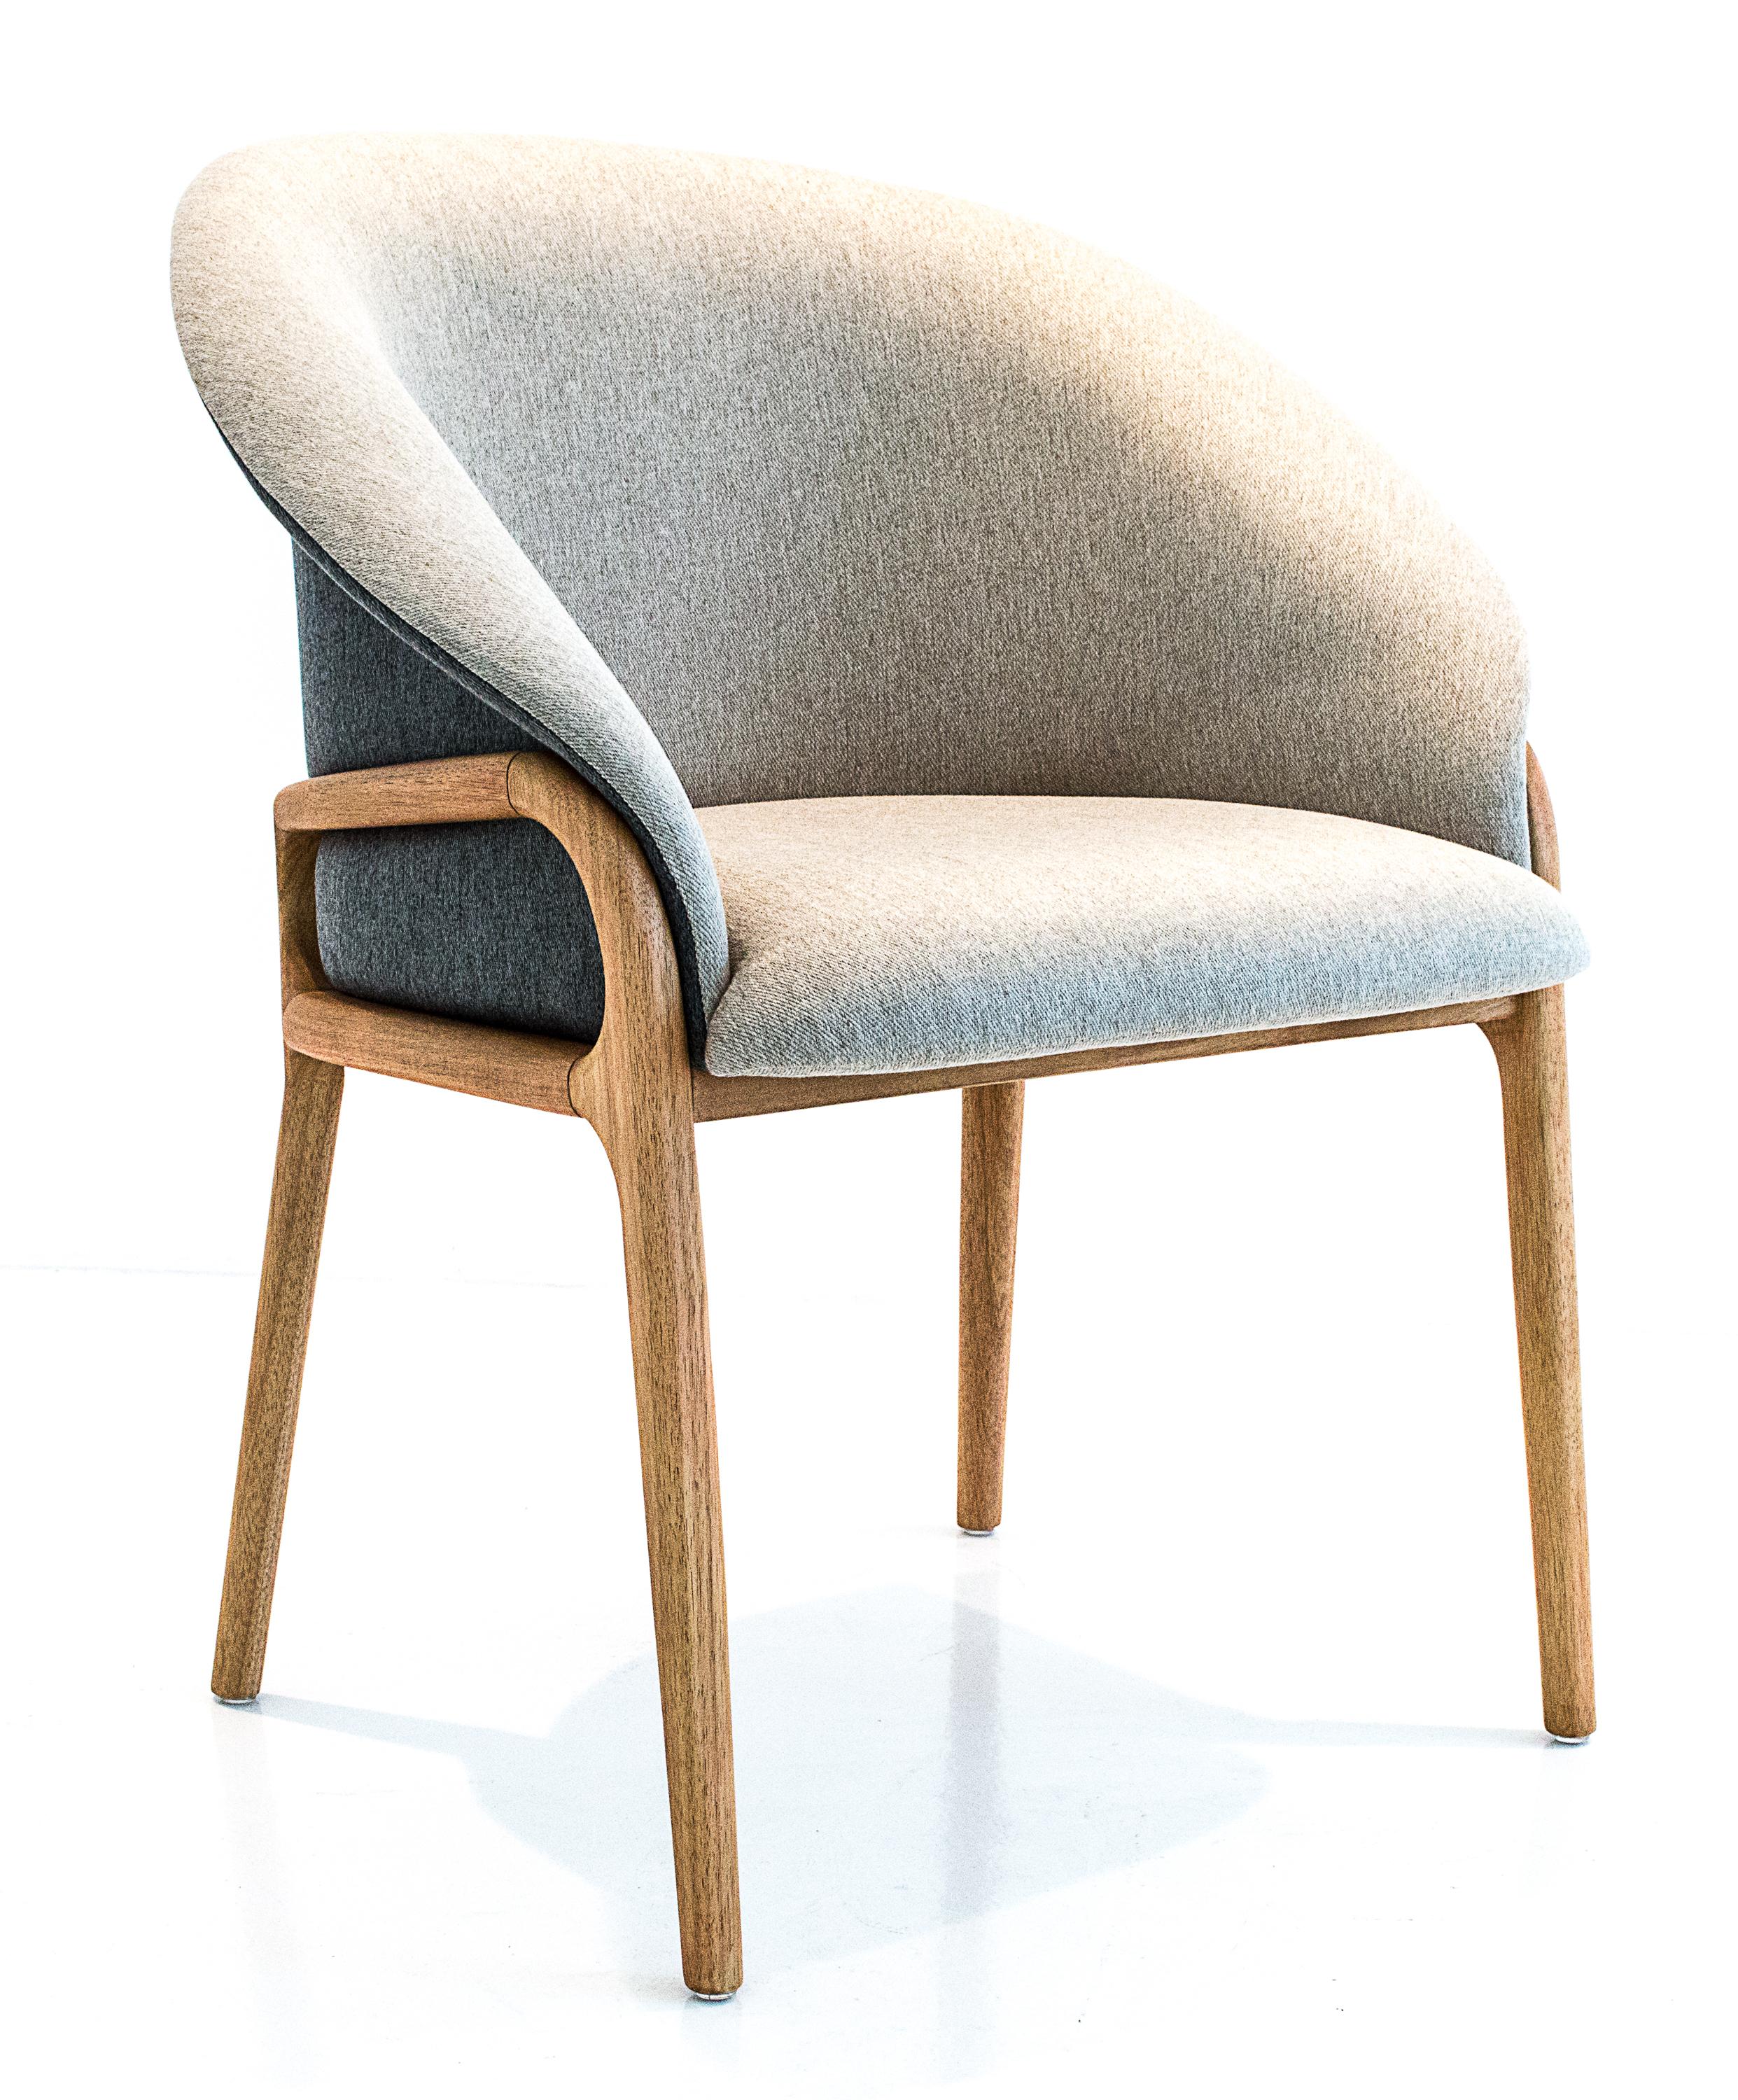 Brazilian Modern Organic Chair in Solid Wood, Upholstered Flexible Seating For Sale